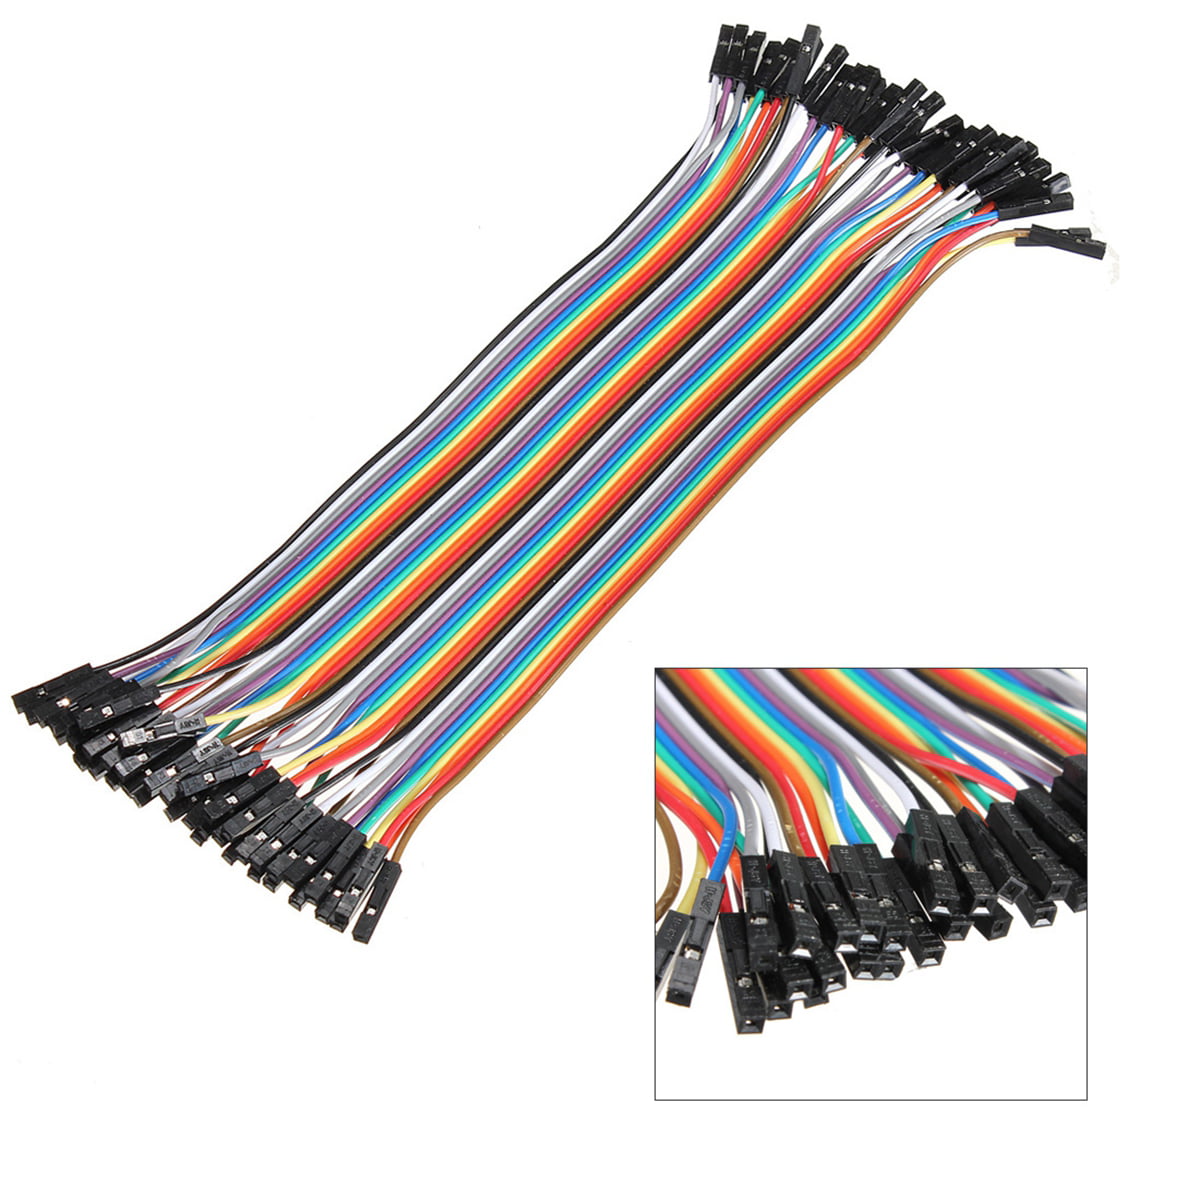 30CM Connection 20CM Female To Female Wire Jumper Cable For Arduino DIY 10CM 